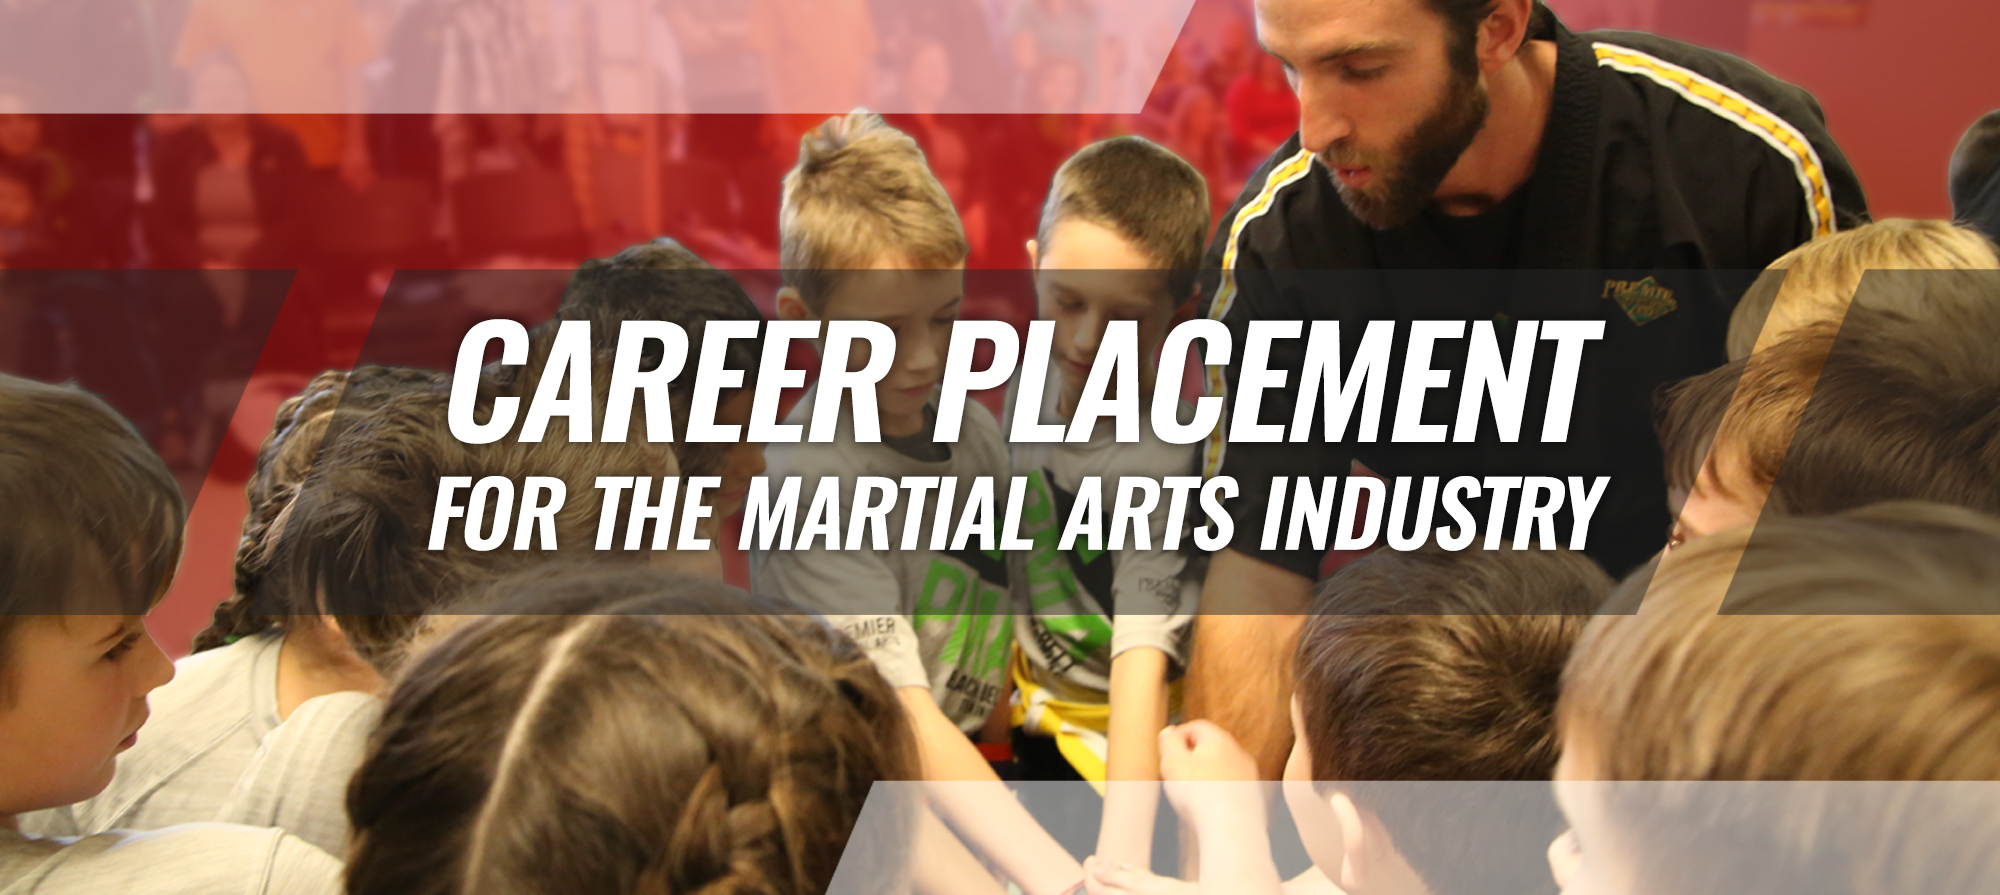 Career Placement for the Martial Arts Industry